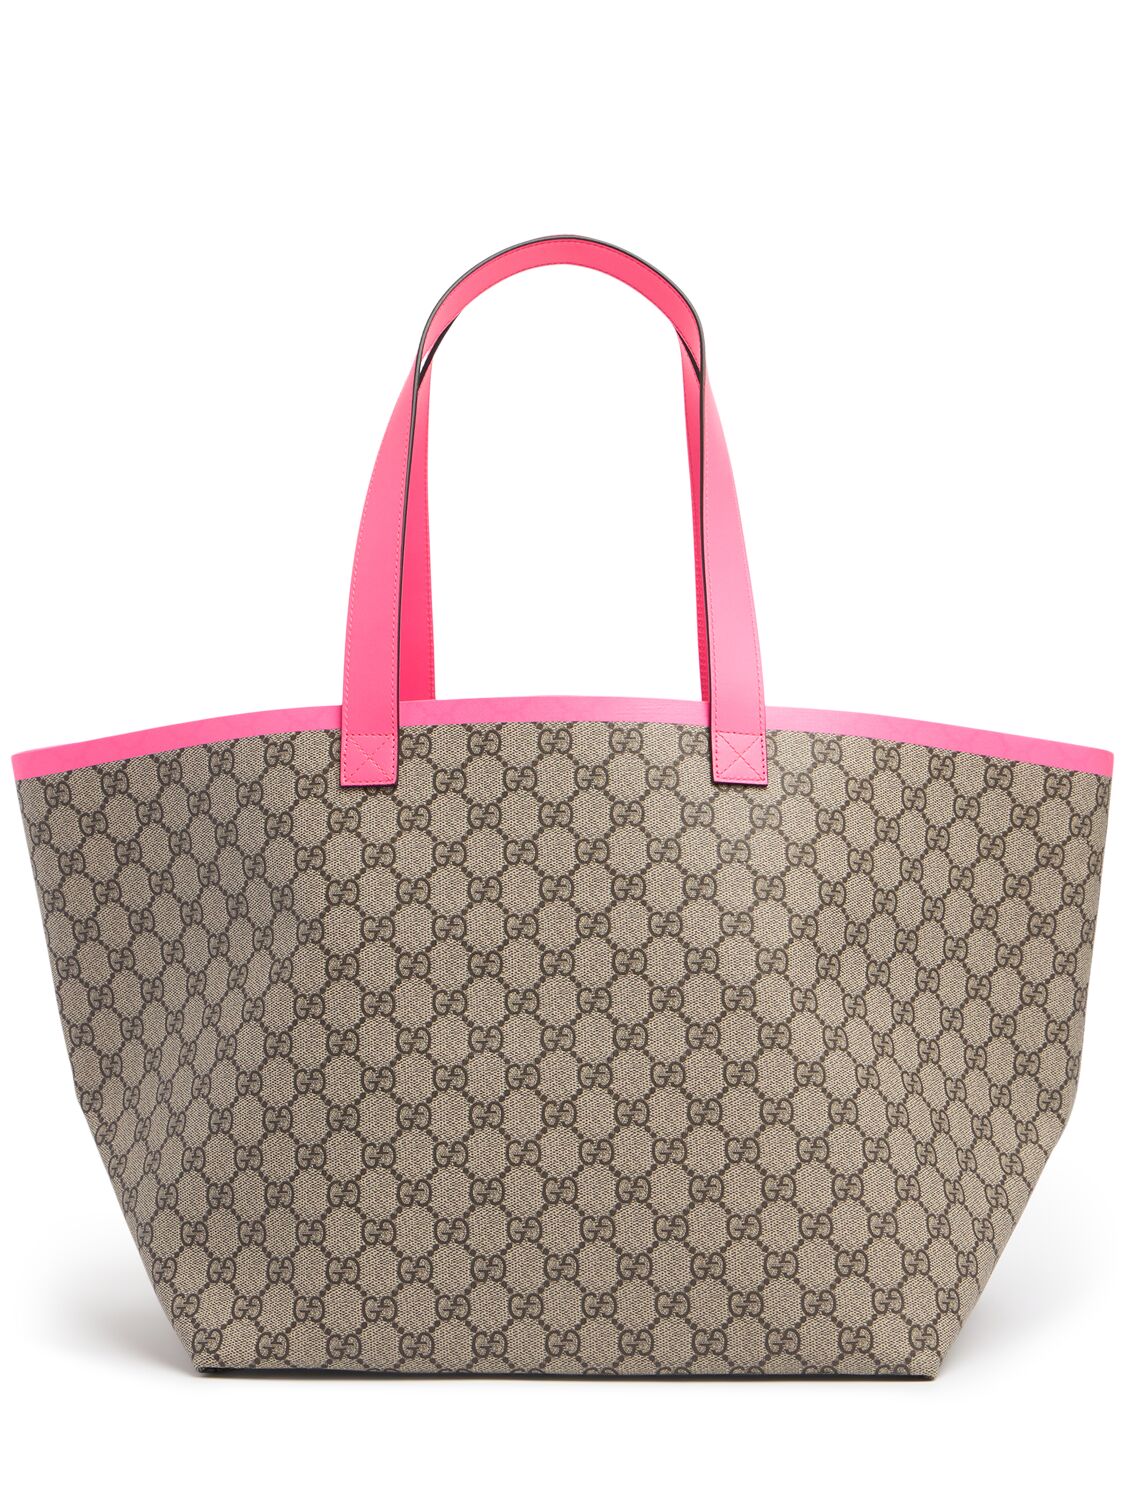 Gucci Medium Ophidia Gg Tote Bag In Brown